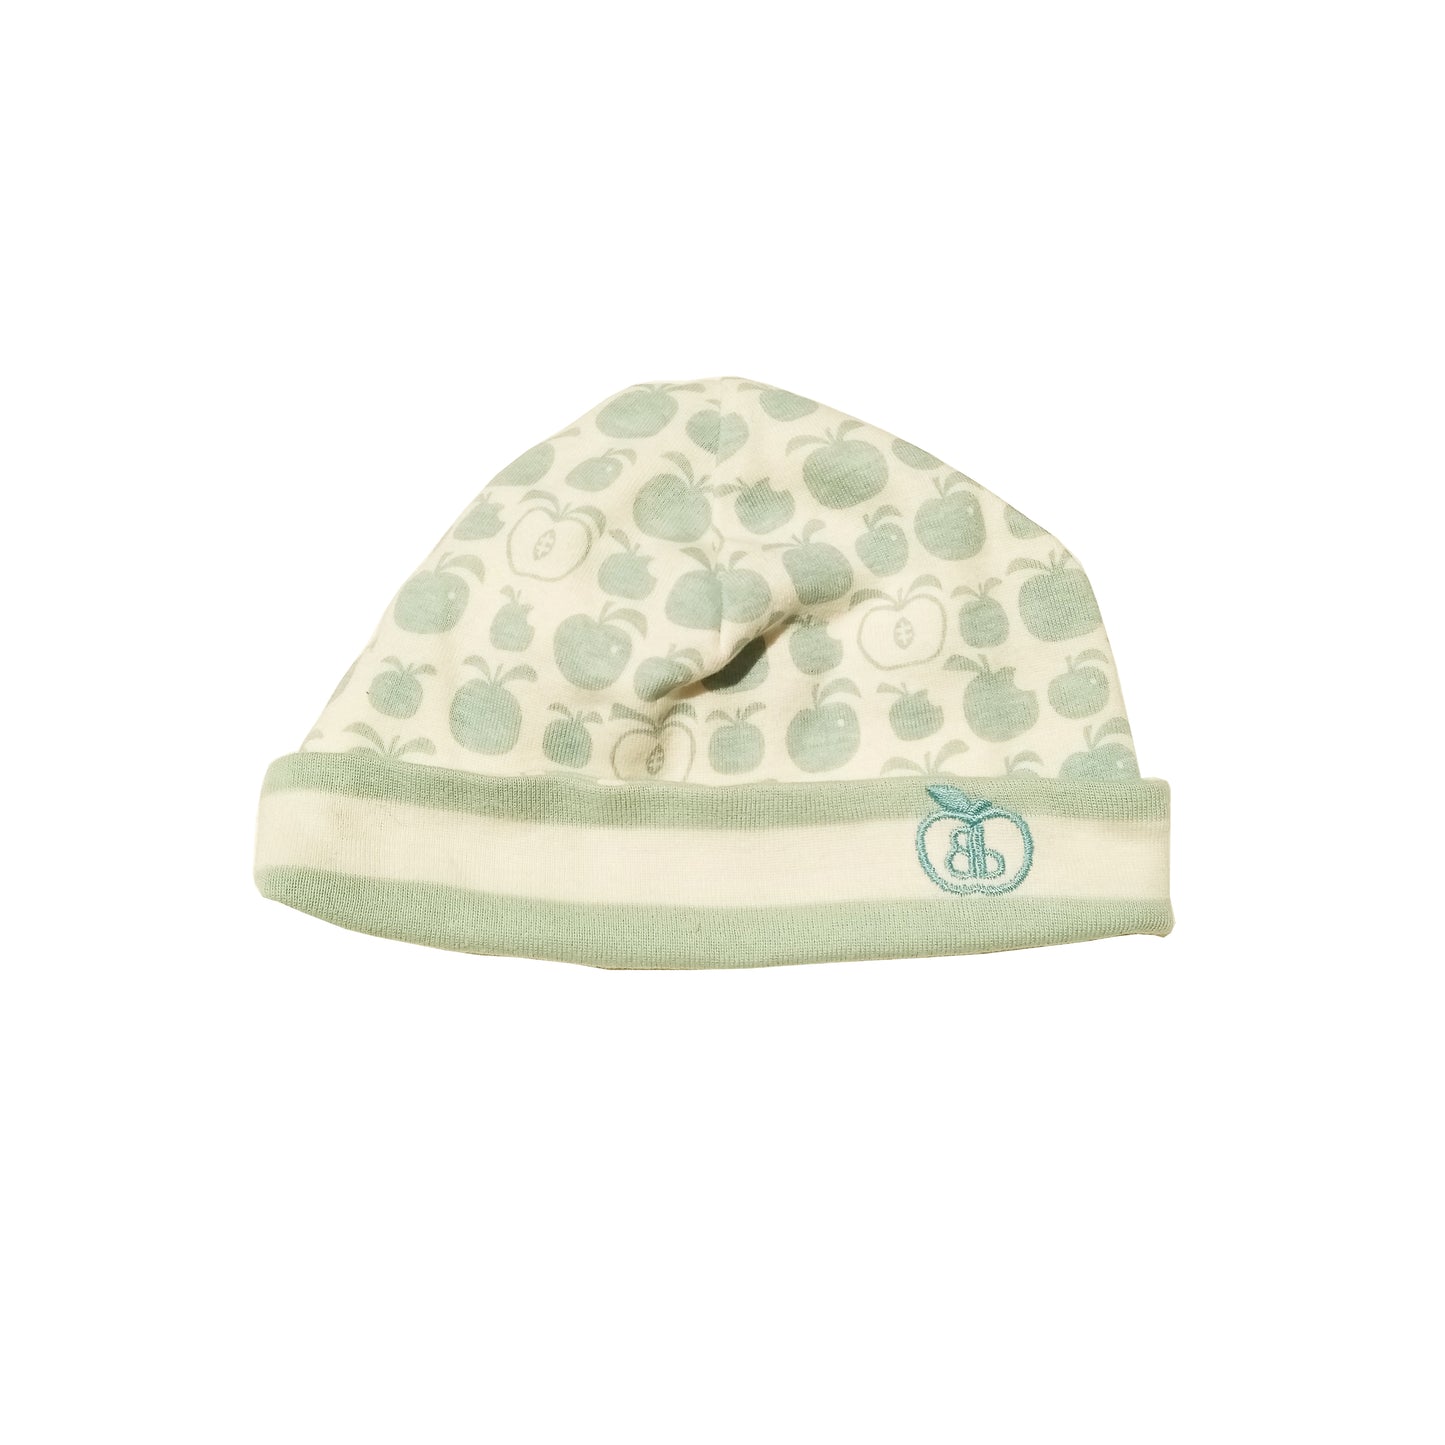 HAT - BABY - 2 COLOR (AURA/DUSTY PINK) - BB184